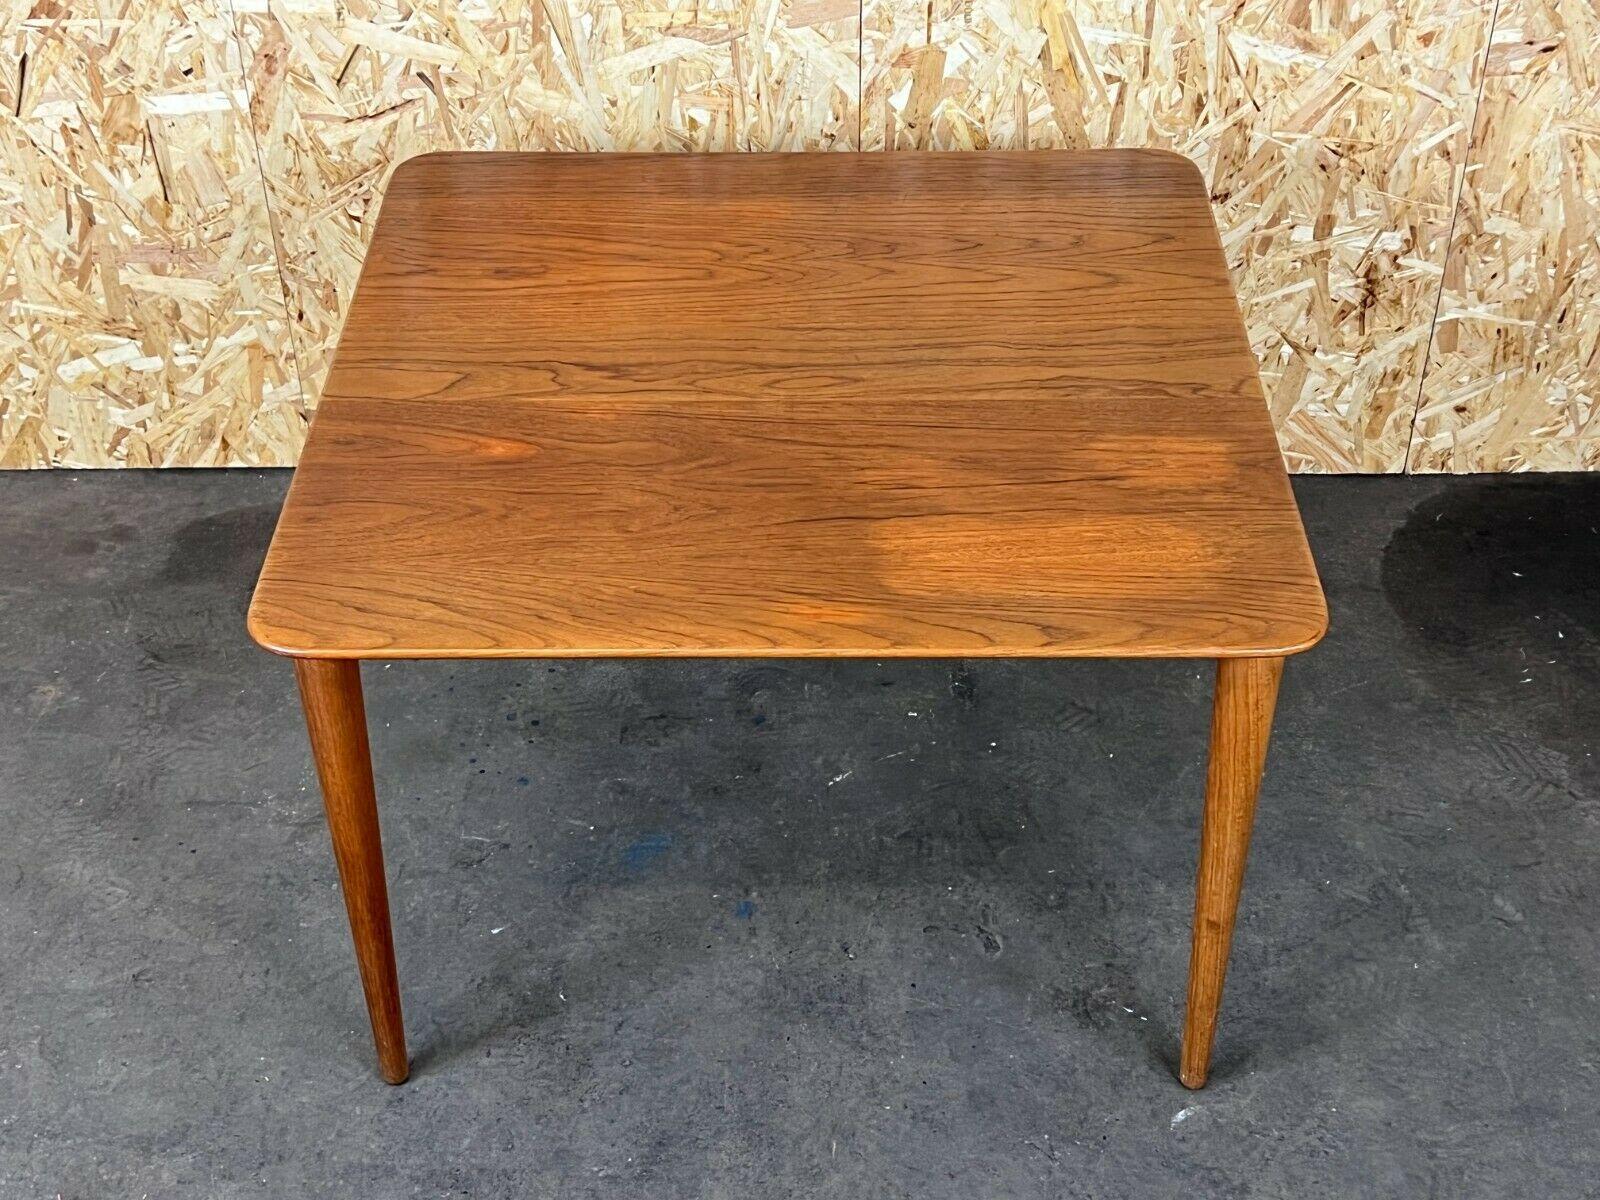 60s 70s teak coffee table Peter Hvidt & Orla Mølgaard-Nielsen for France & Søn

Object: coffee table

Manufacturer: France & Son

Condition: good - vintage

Age: around 1960-1970

Dimensions:

76.5cm x 76.5cm x 50cm

Other